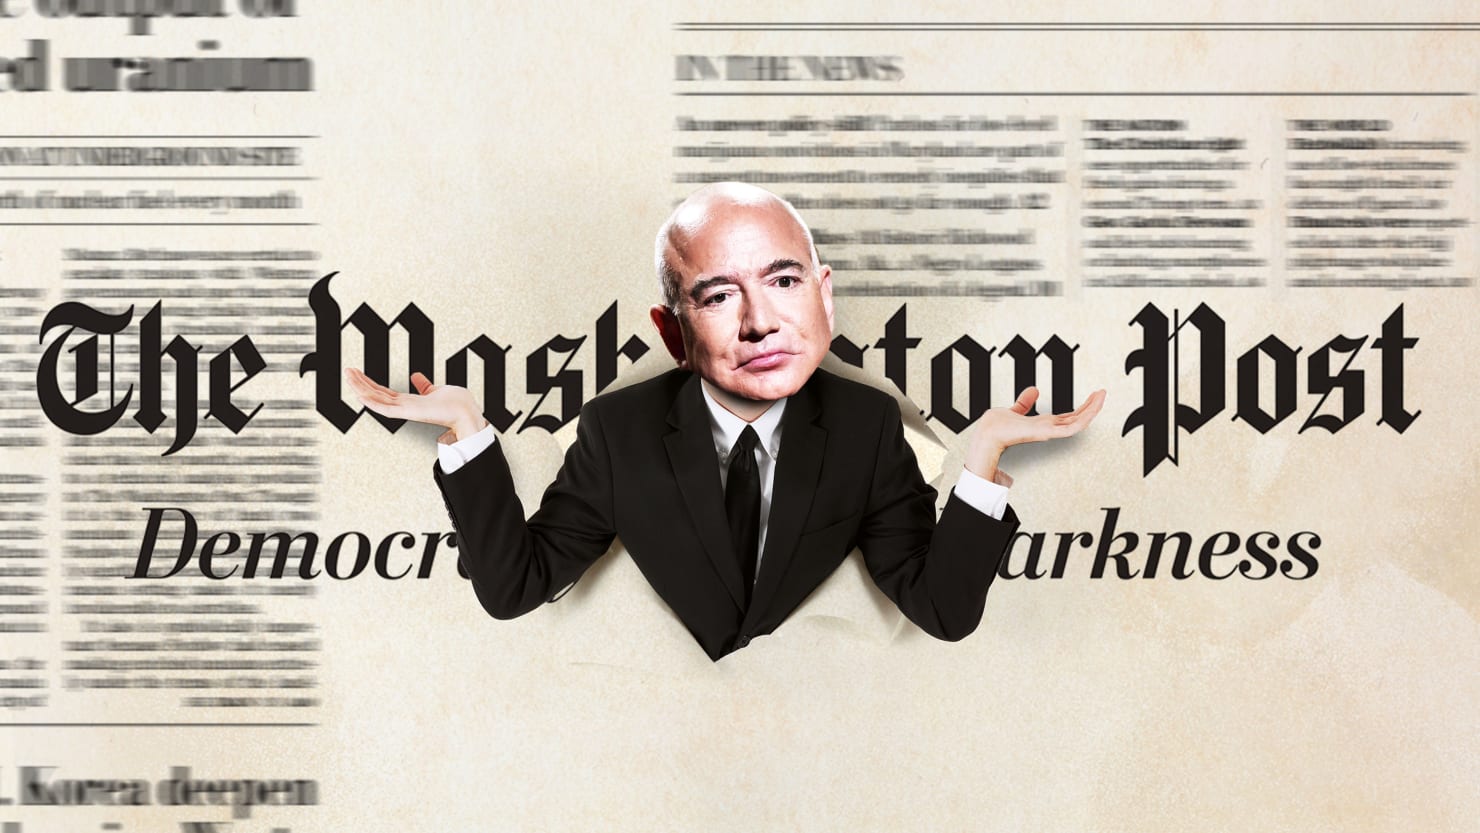 Jeff Bezos Hasn’t Delivered What He Promised With The Washington Post